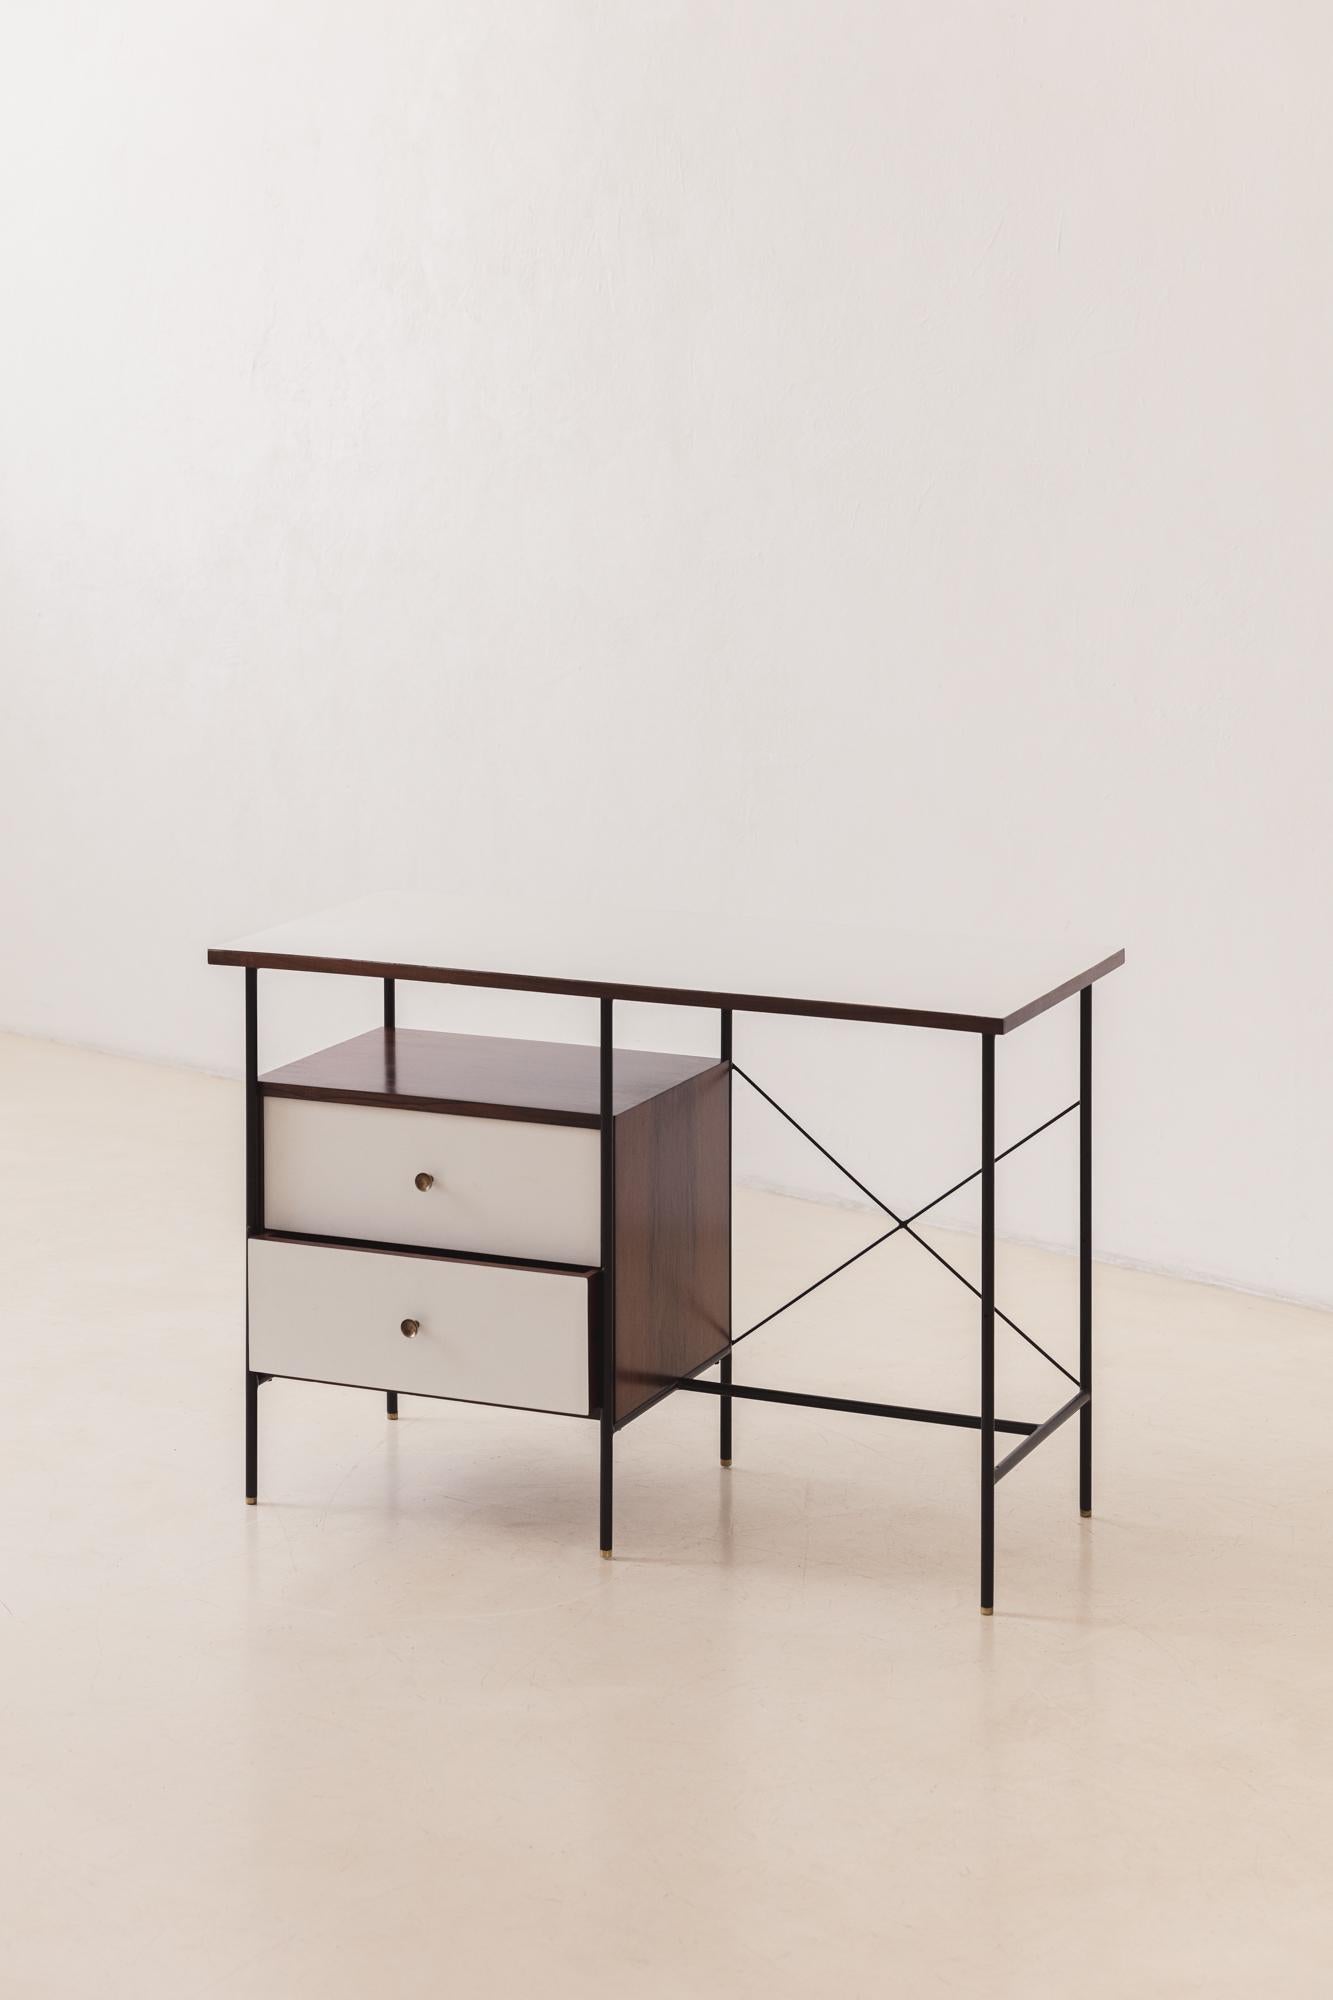 This desk was produced by the pioneer company Unilabor, with components designed by Geraldo de Barros (1923-1998). Its iron structure supports a top and drawers covered with Formica – a new decorative solution developed by the industry in the